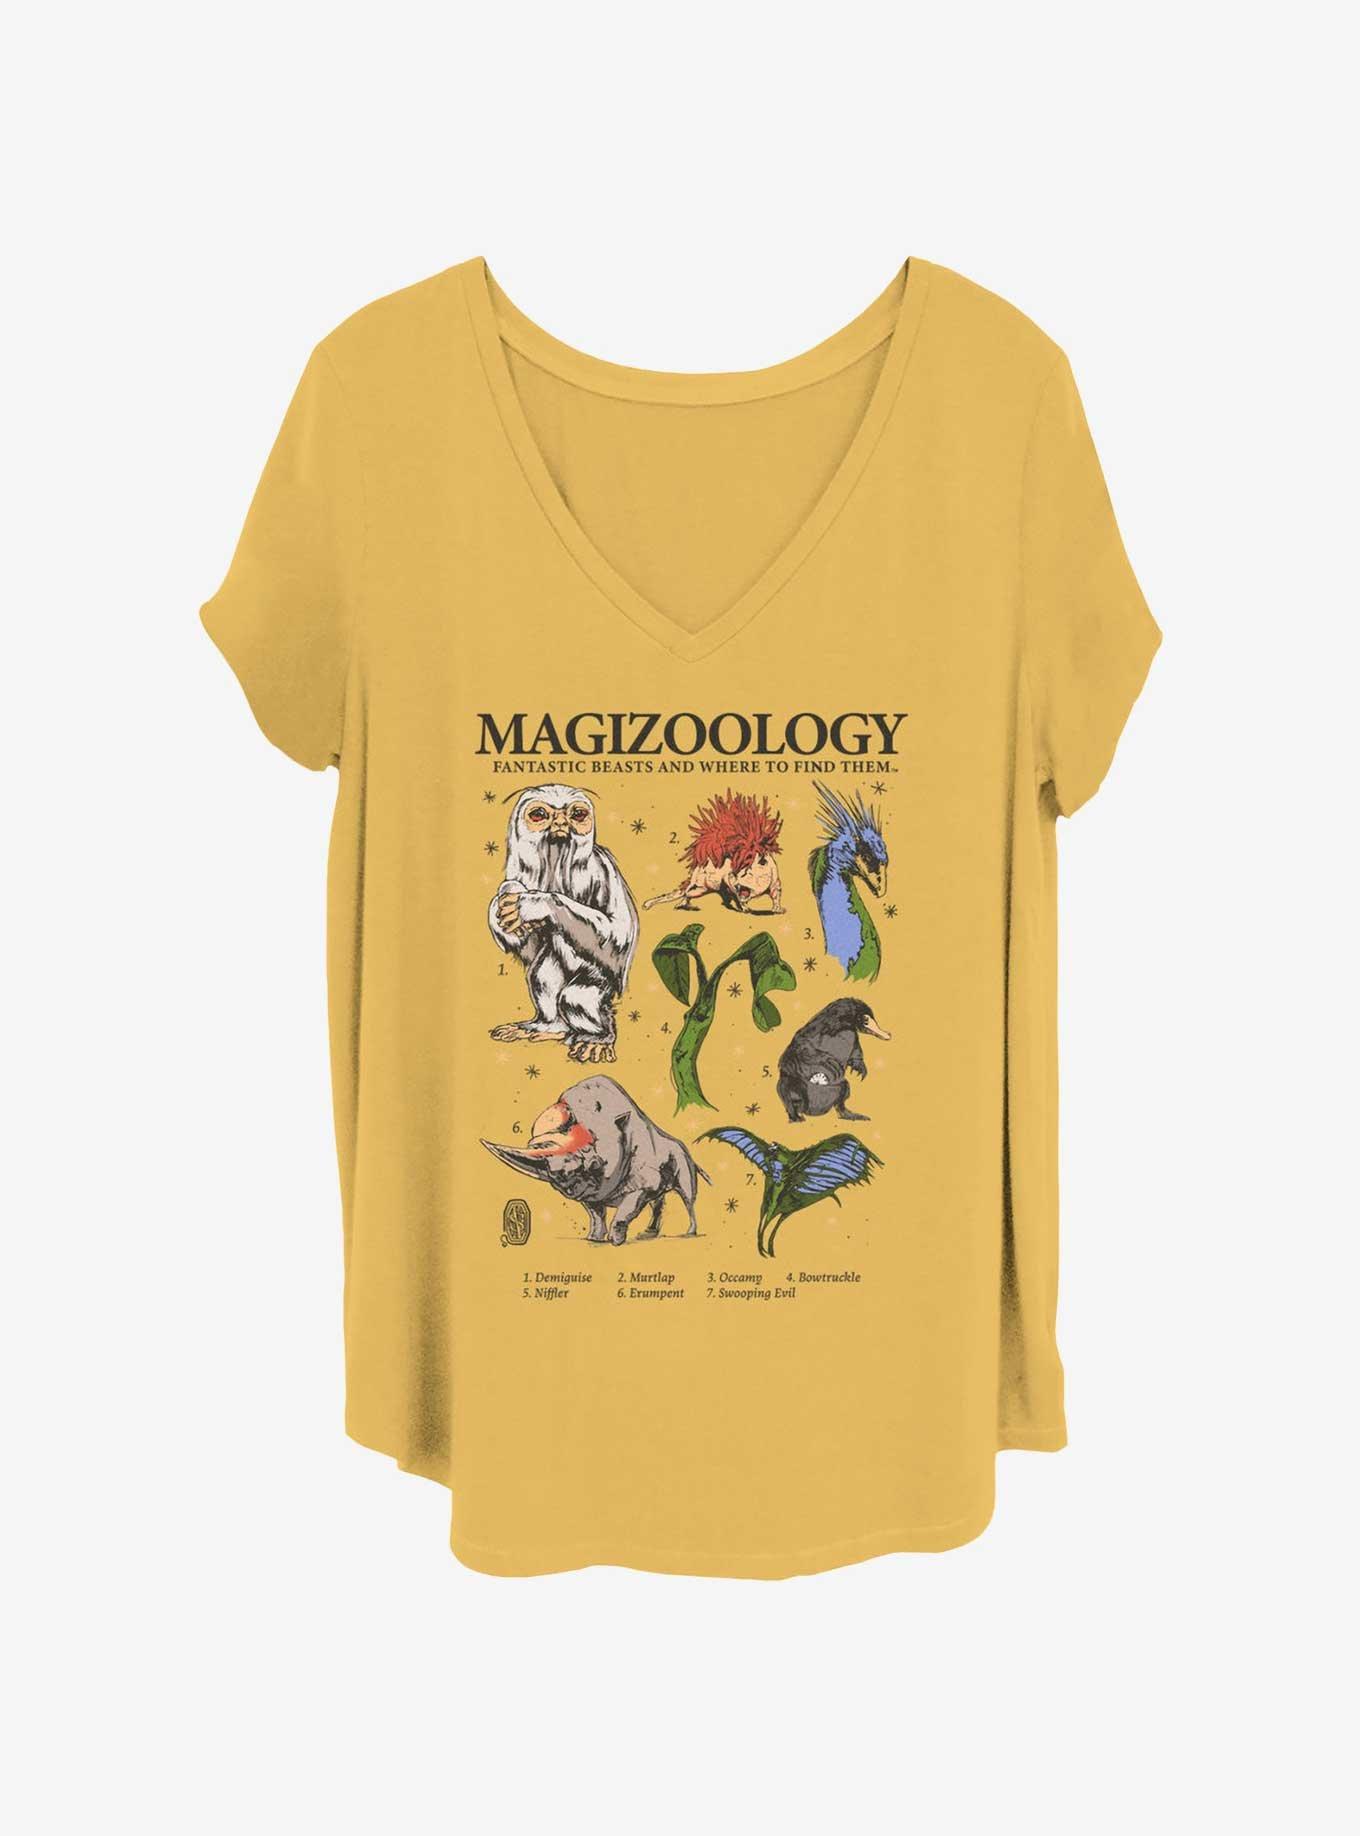 Fantastic Beasts and Where to Find Them Magizoology Girls T-Shirt Plus Size, OCHRE, hi-res